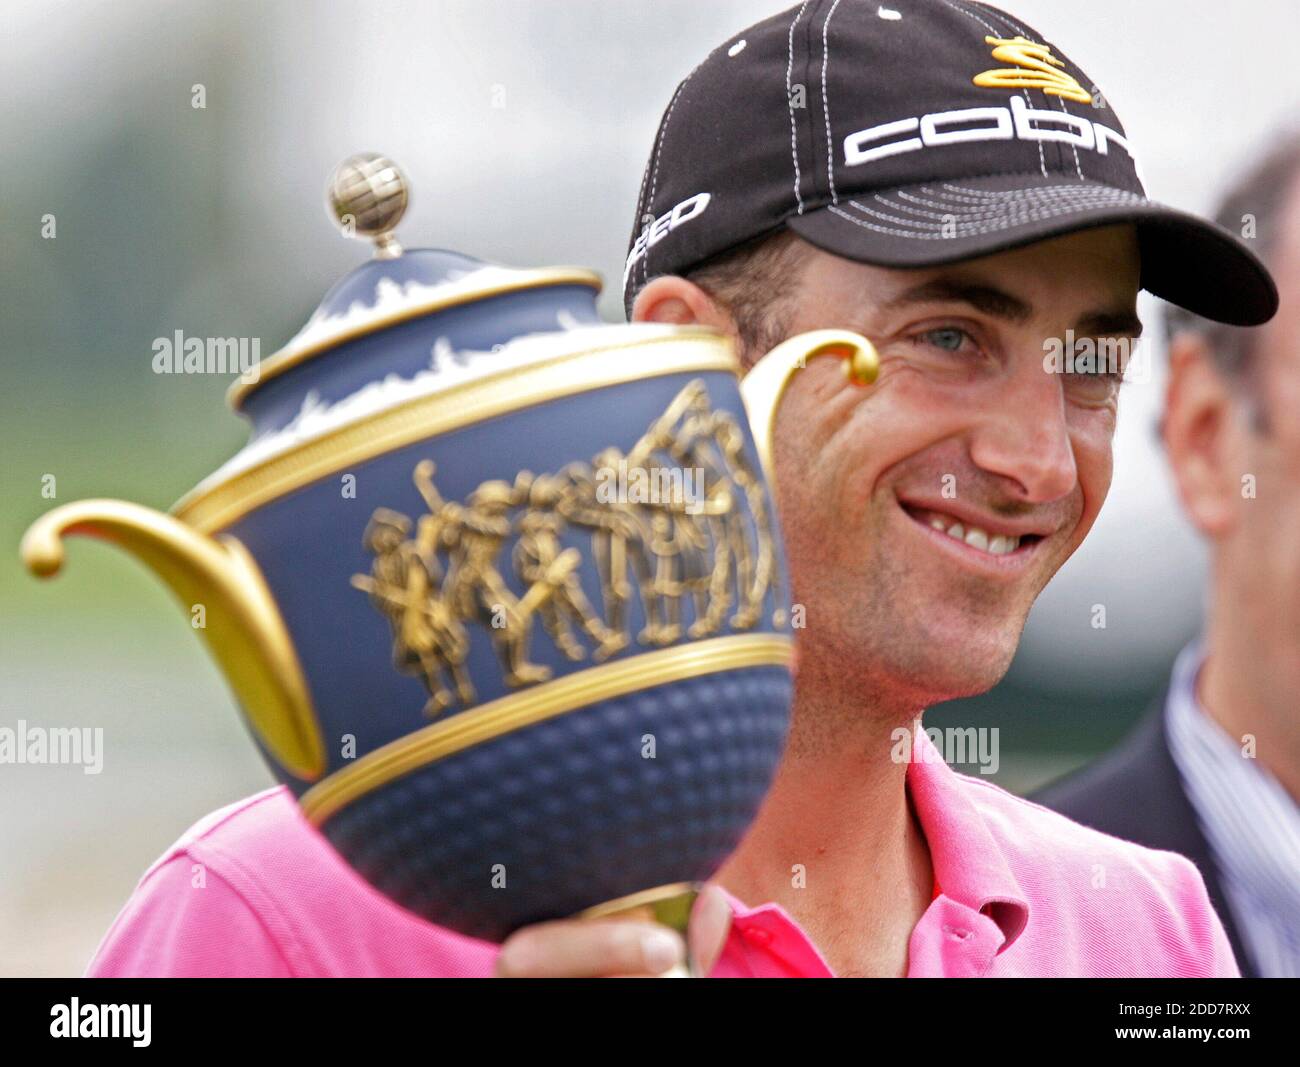 NO FILM, NO VIDEO, NO TV, NO DOCUMENTARY - Geoff Ogilvy hoists the Gene Sarazen Cup after winning the World Golf Championship-CA Championship at the Doral Golf Resort in Miami, FL, USA on March 24, 2008, after rain delayed the finish. Photo by John VanBeekum/Miami Herald/MCT/Cameleon/ABACAPRESS.COM Stock Photo